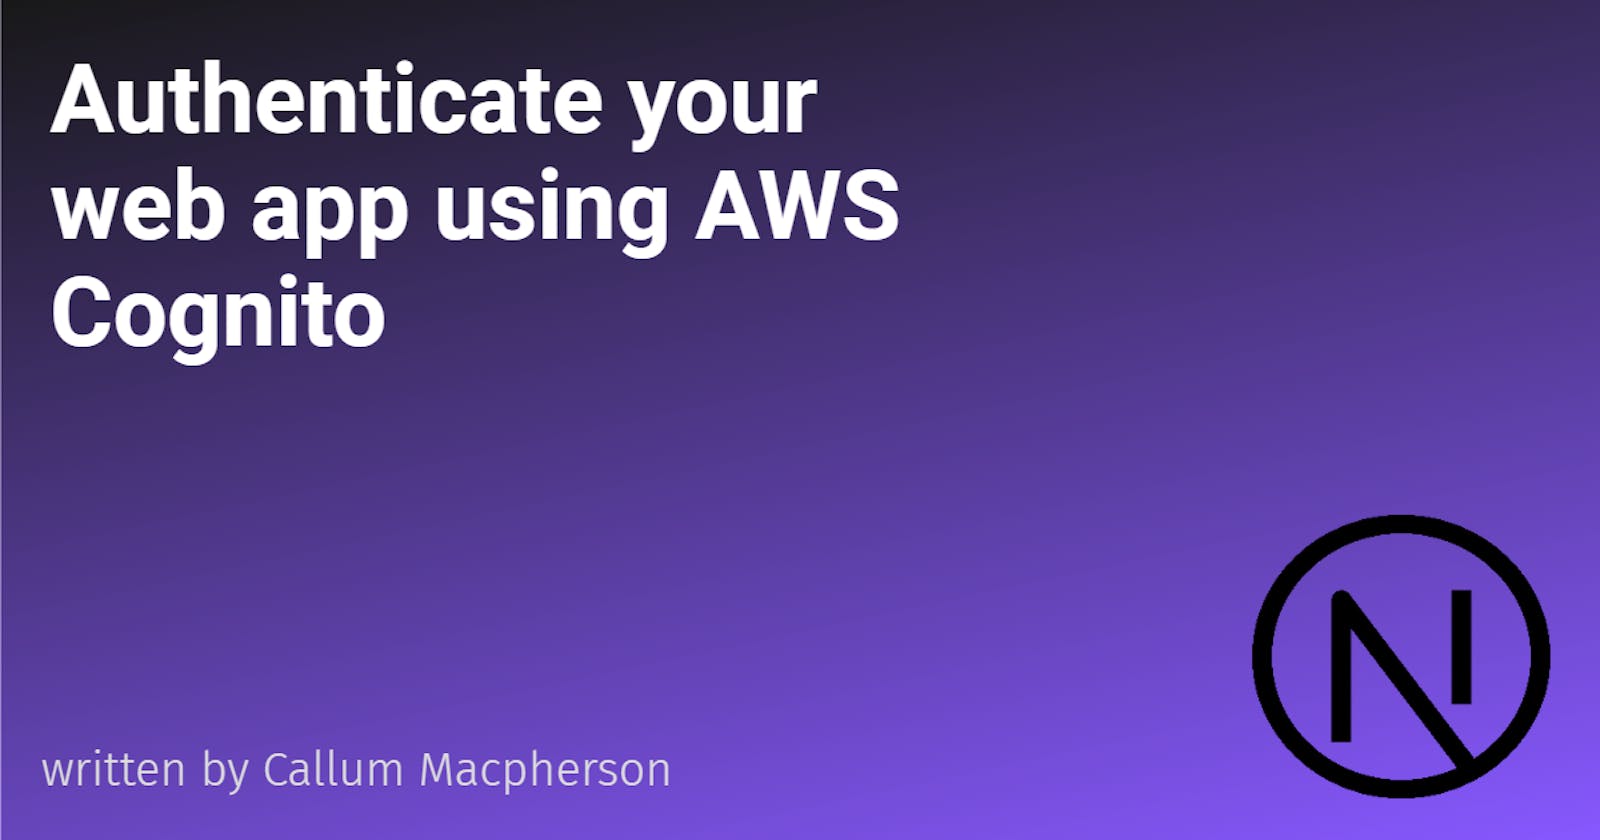 Authenticate your web app using AWS Cognito